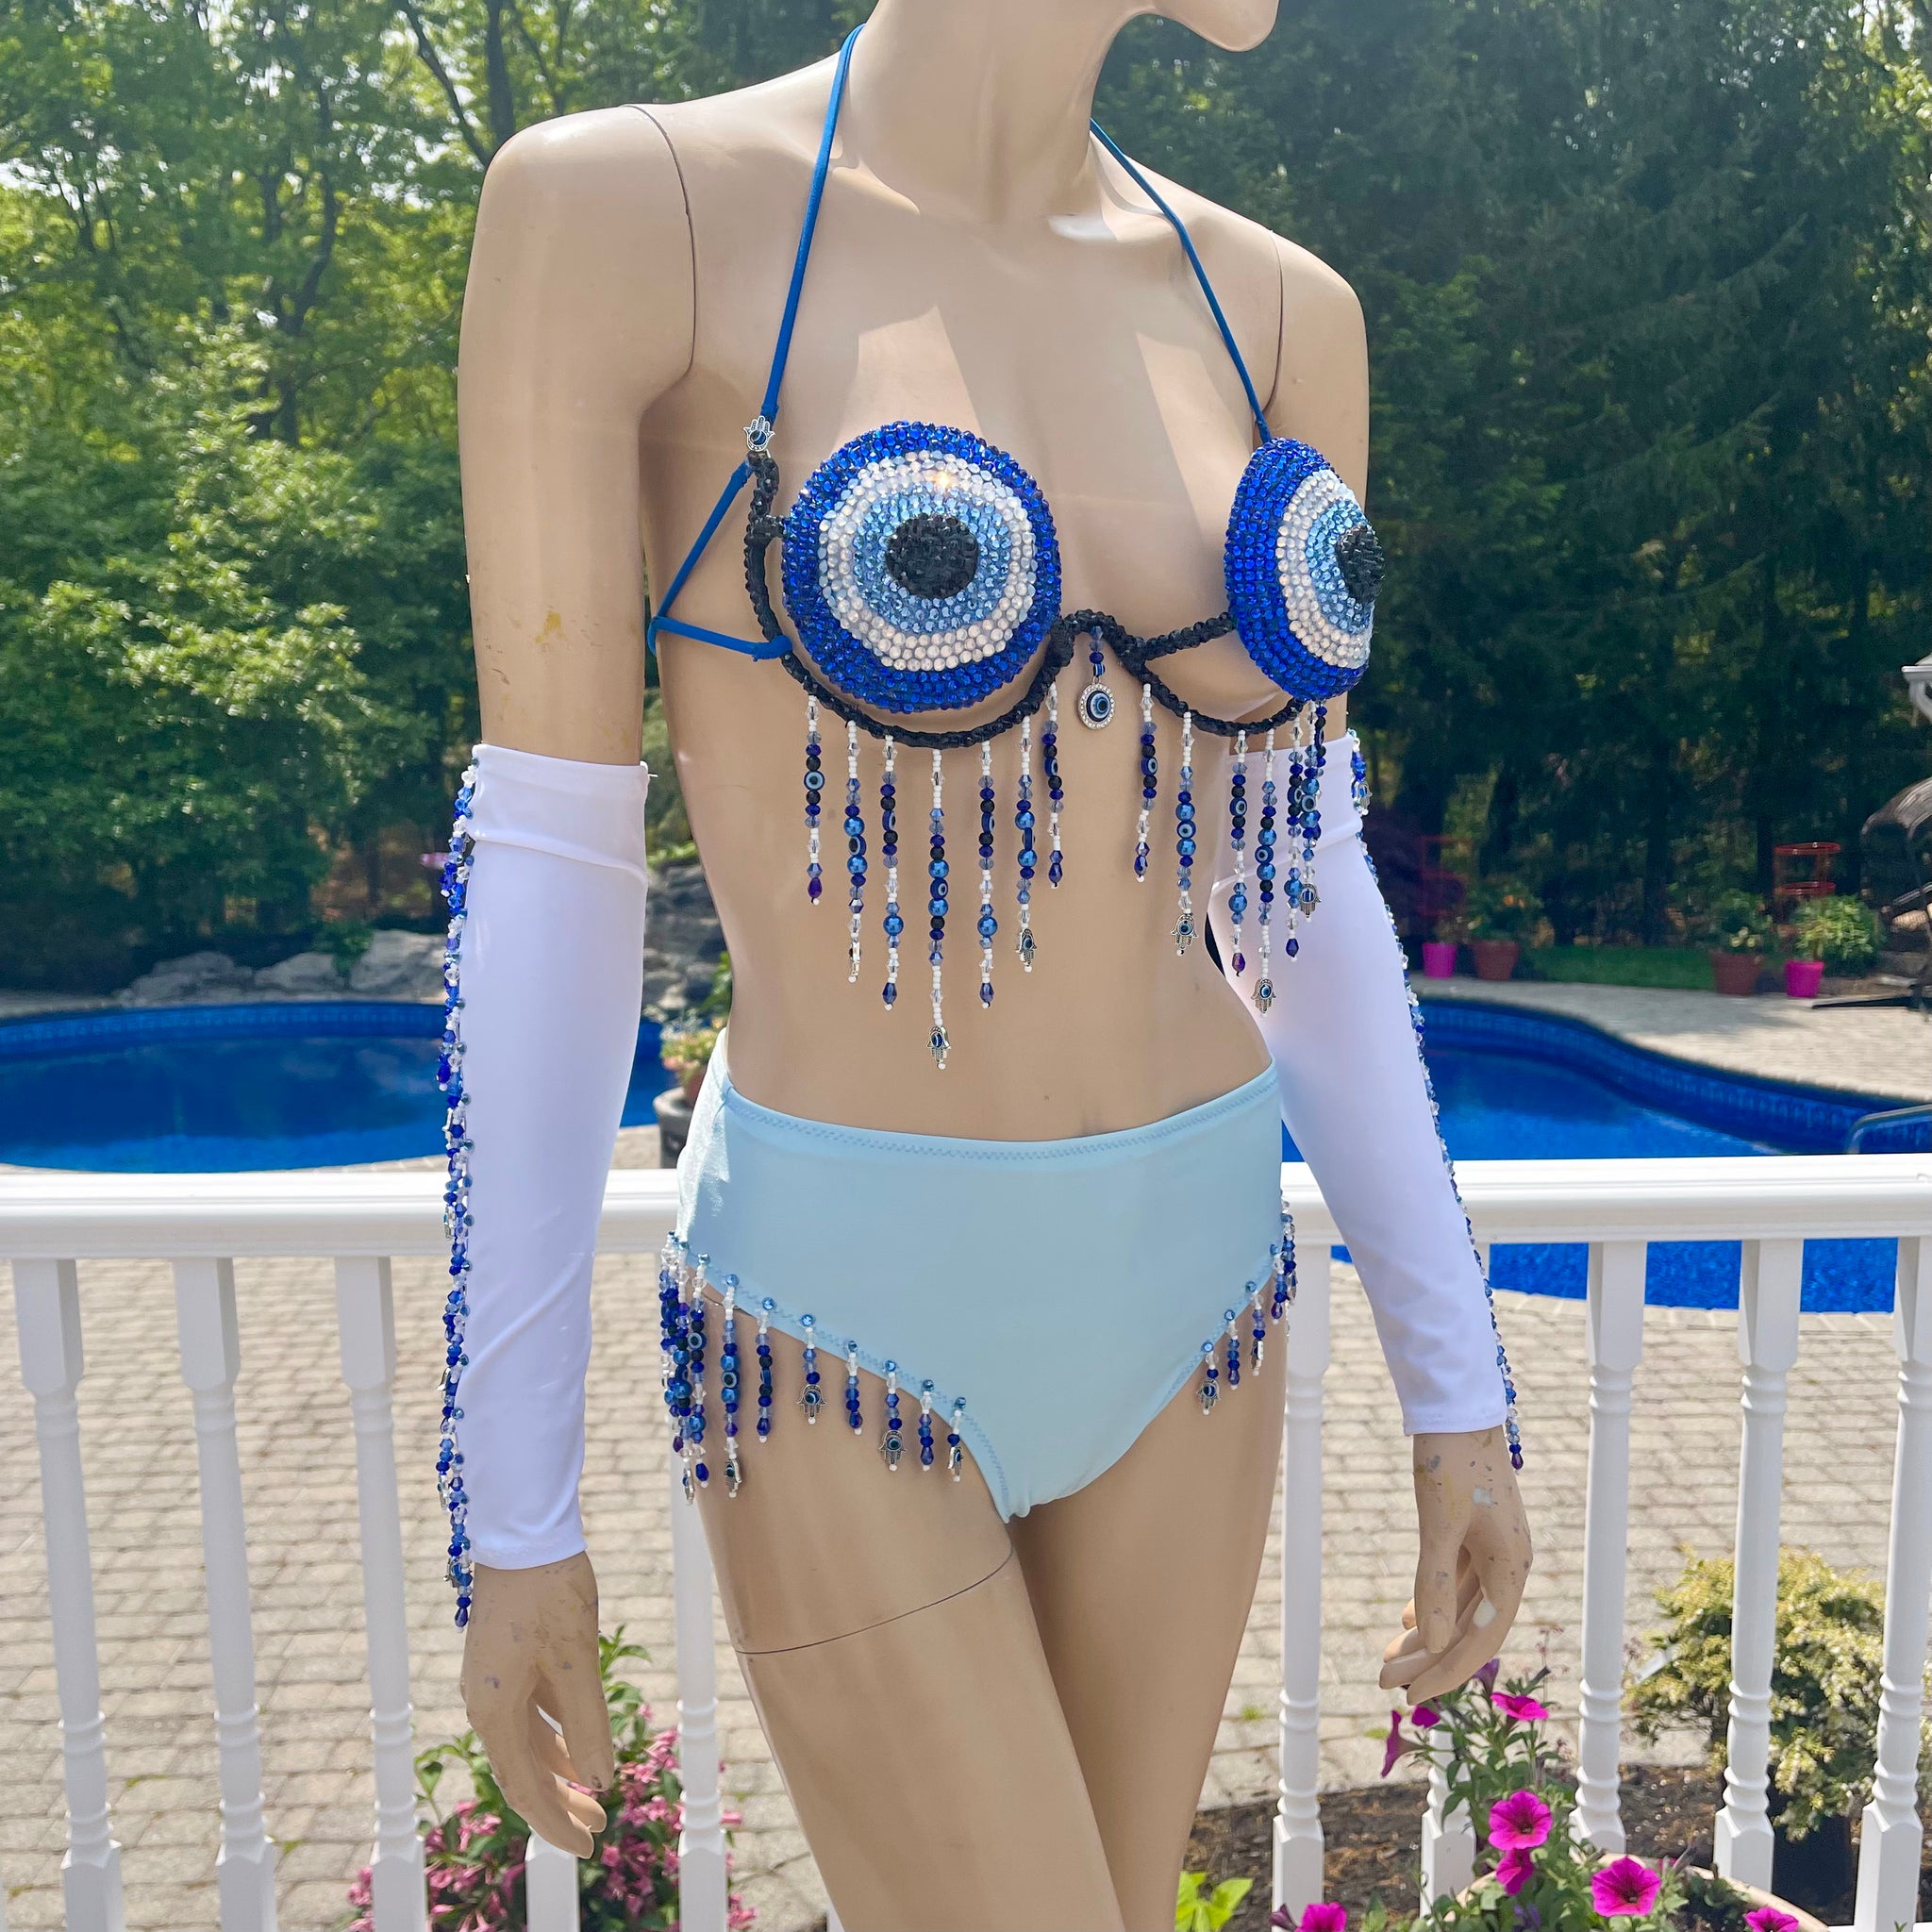 Blue Eye Carnival Top, Wrist bands and Bottom